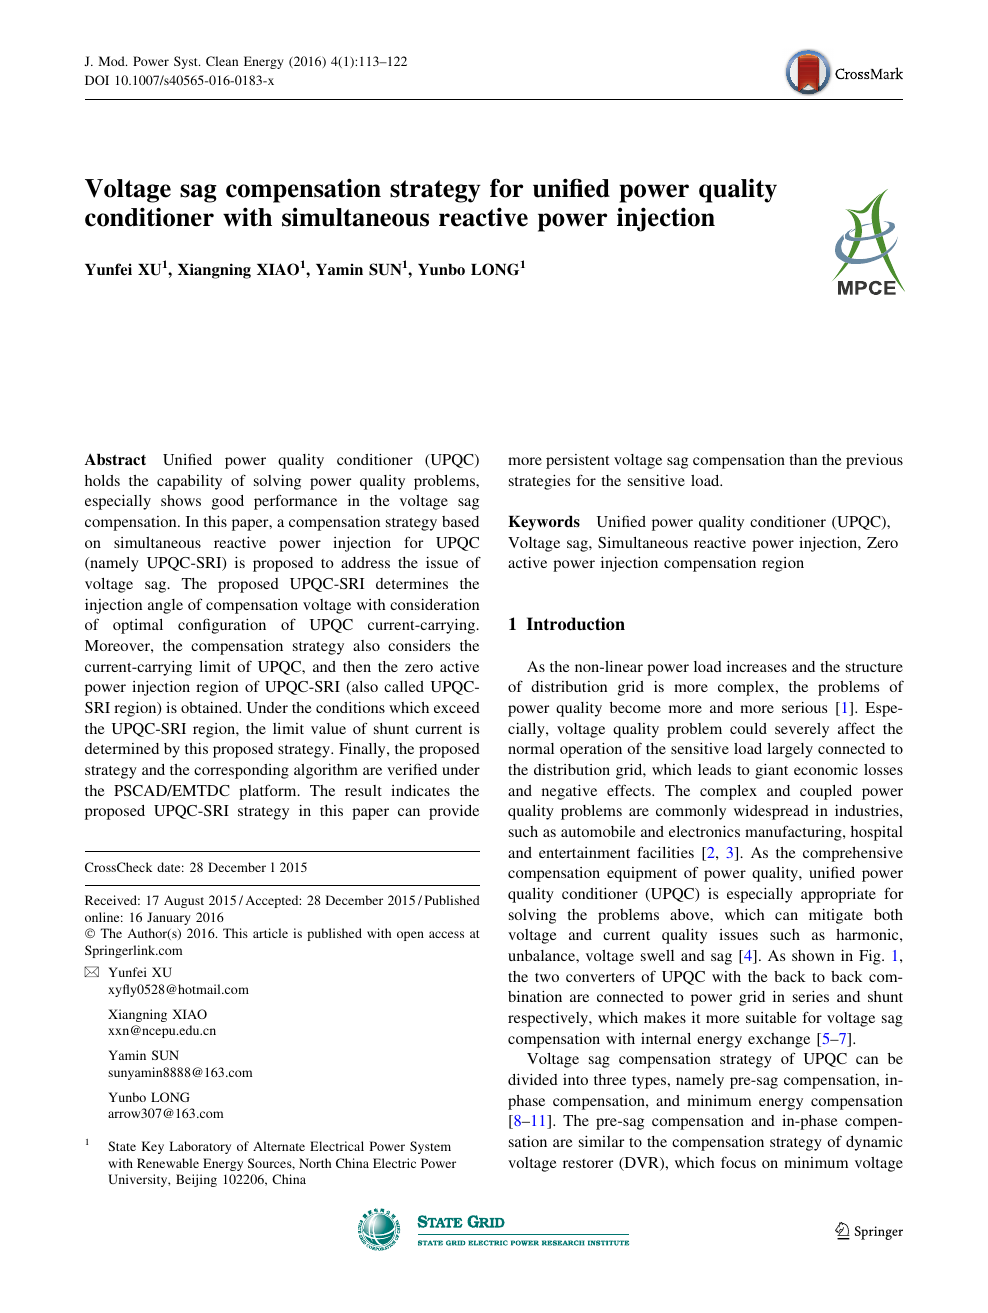 Voltage Sag Compensation Strategy For Unified Power Quality Conditioner With Simultaneous Reactive Power Injection Topic Of Research Paper In Electrical Engineering Electronic Engineering Information Engineering Download Scholarly Article Pdf And Read